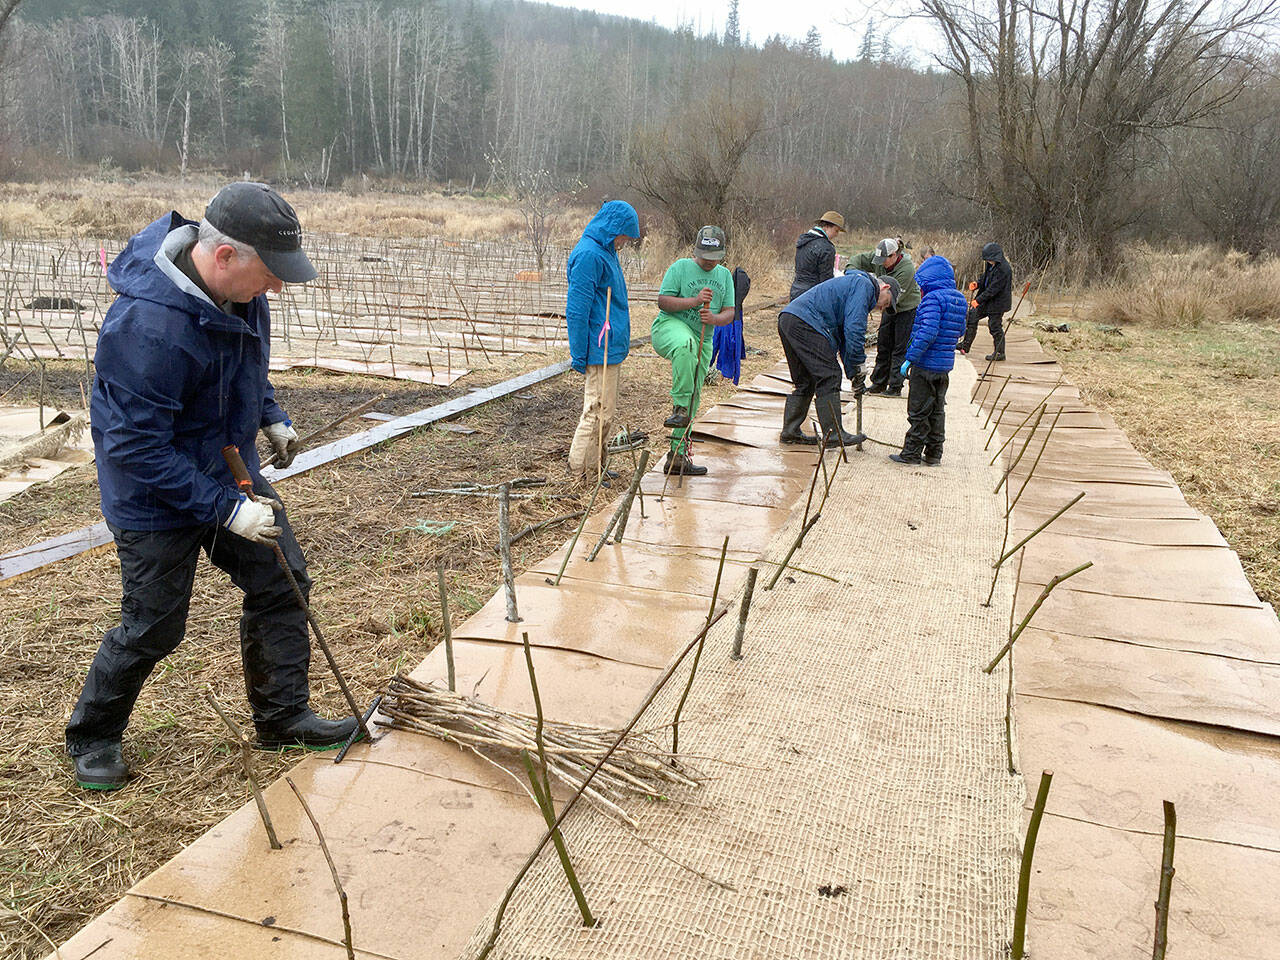 Volunteers stab through sheets of cardboard to plant shrubs to grow to shade out reed canary grass, an invasive species, along Tarboo Creek during the 16th annual Plant-A-Thon. (Northwest Watershed Institute)